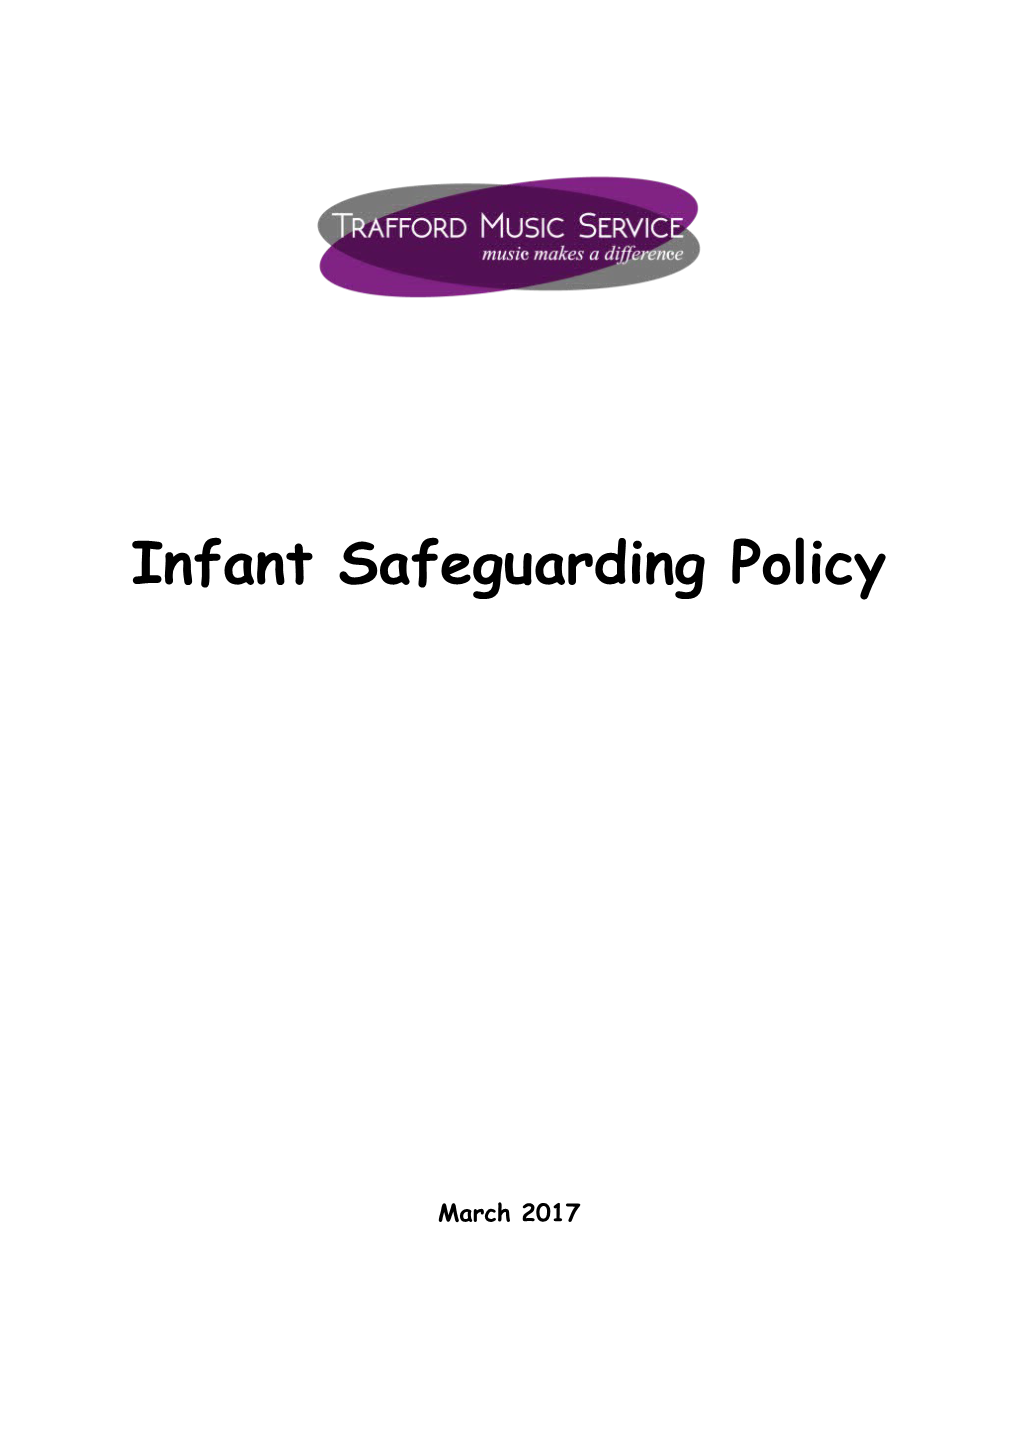 Why Do We Need a Safeguarding Policy?